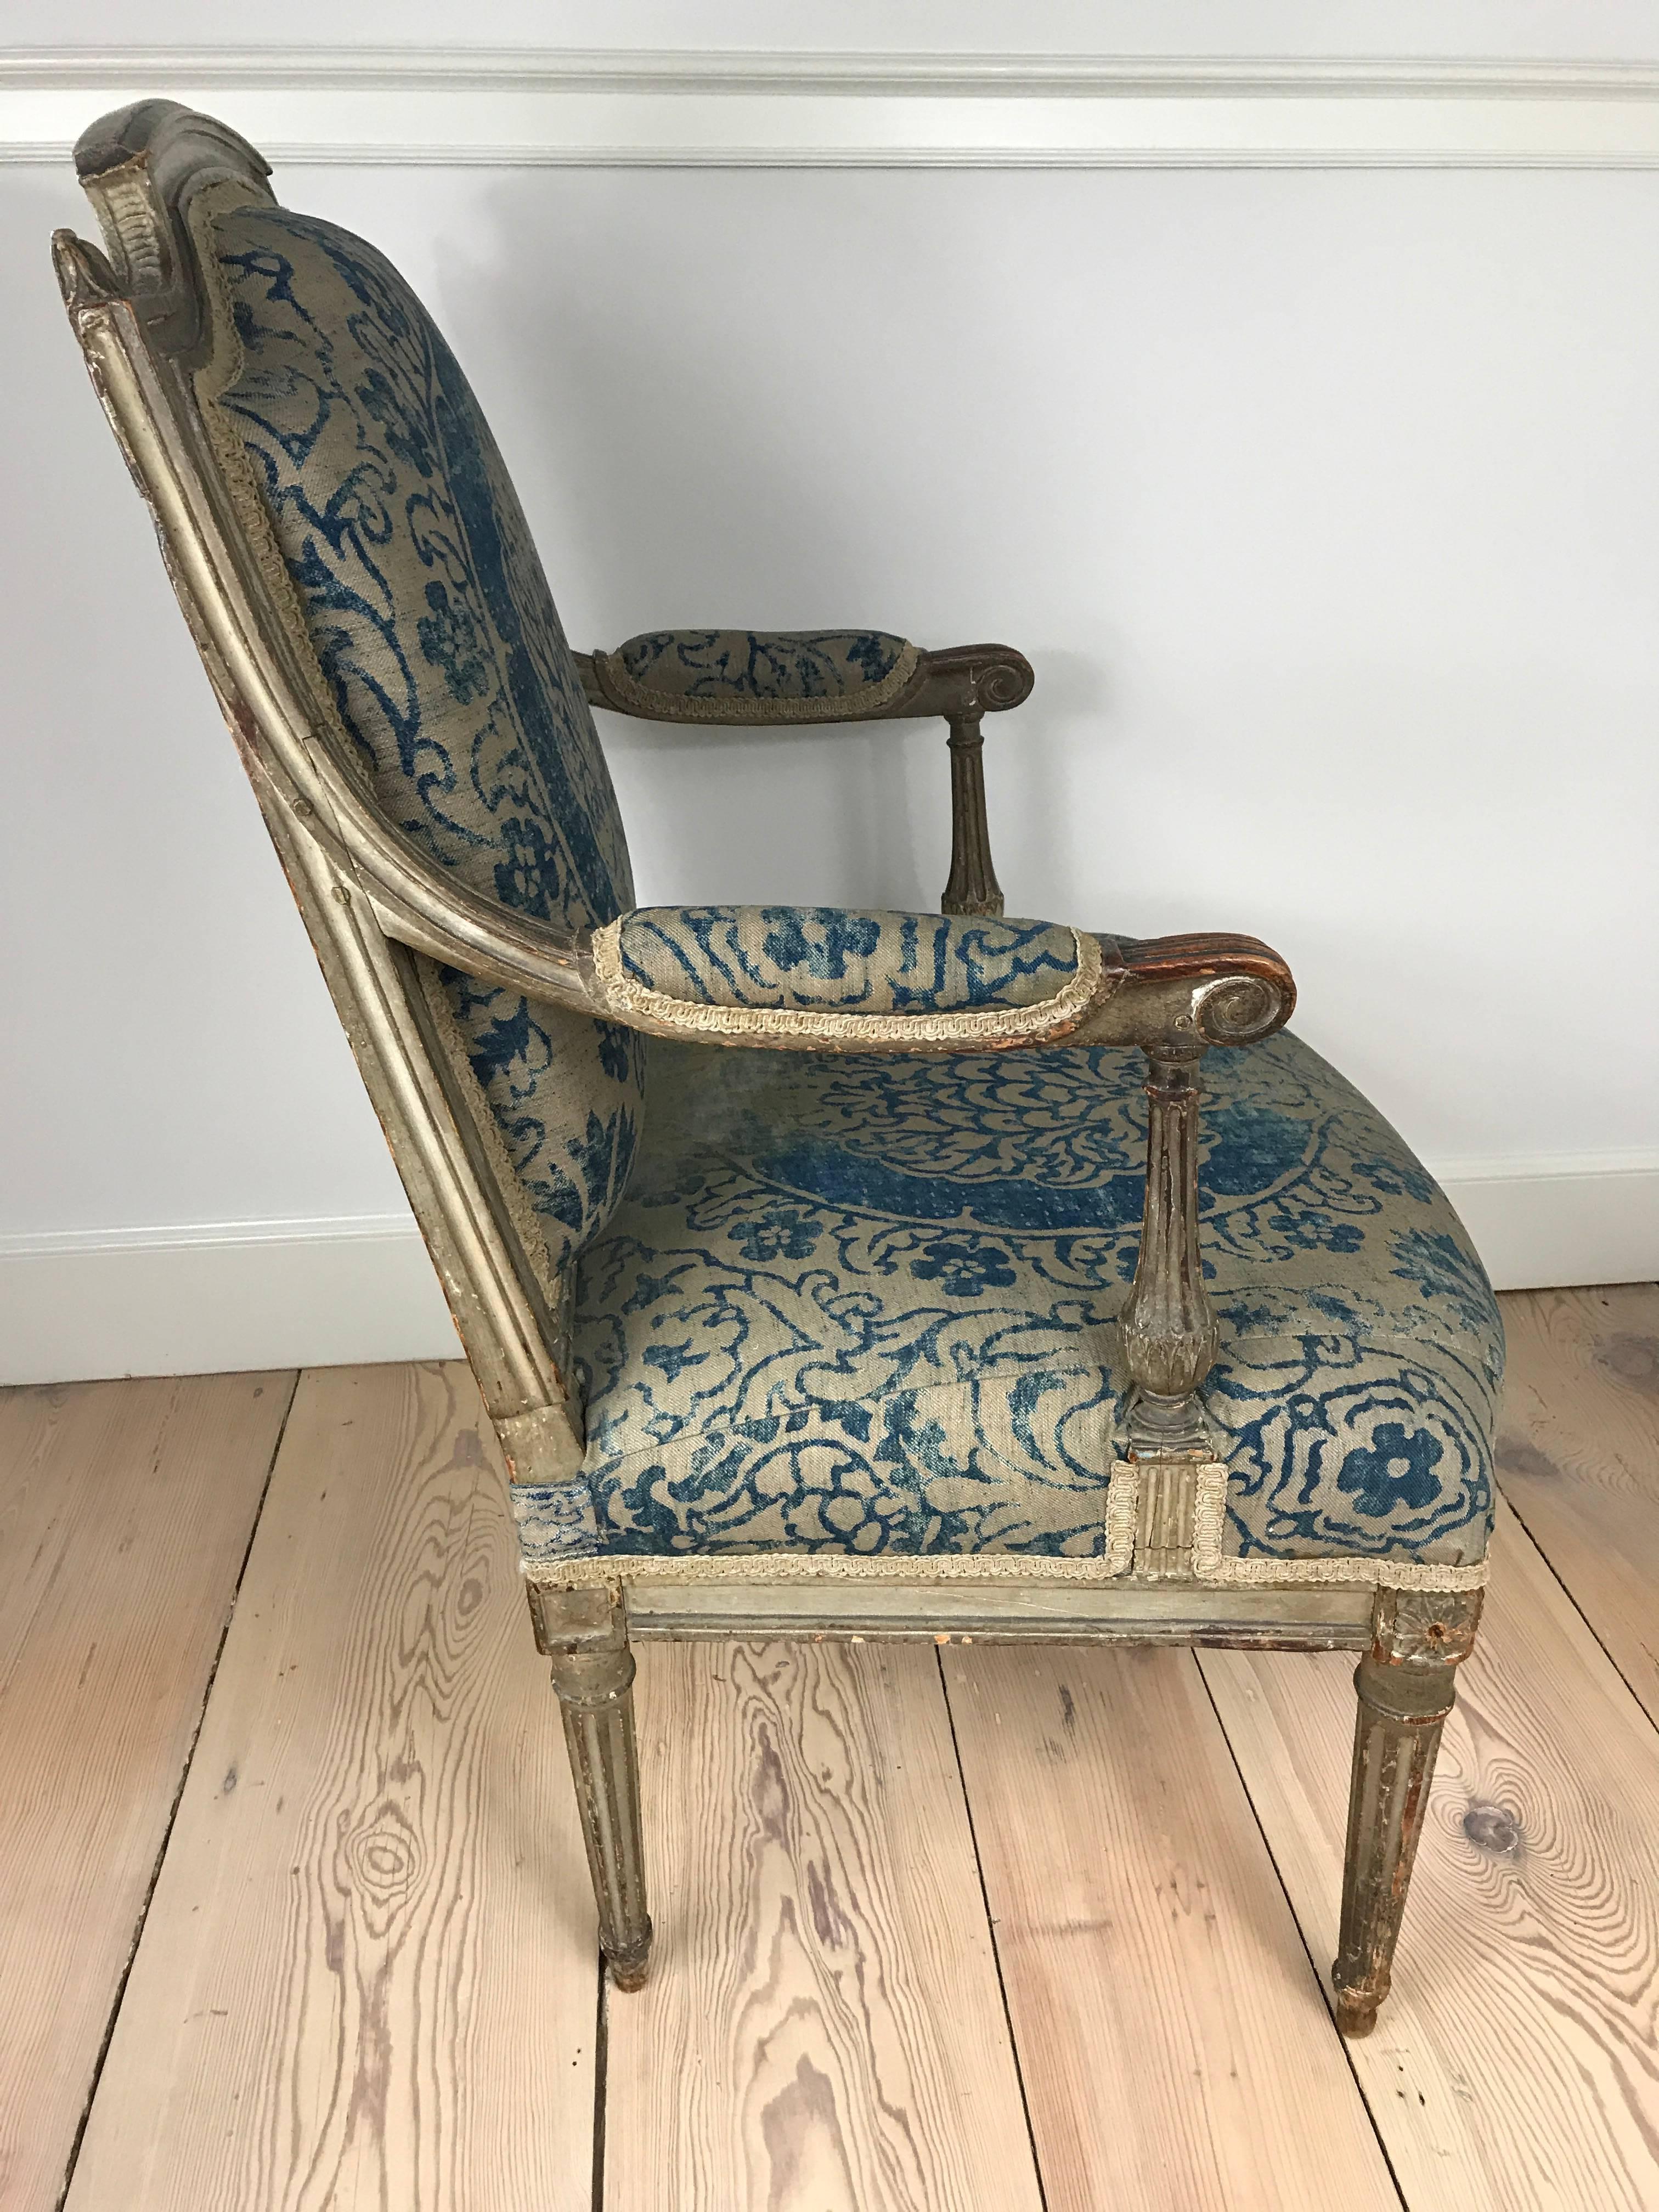 French 18th Century Louis XVI Fauteuil Upholstered in Fortuny Fabric